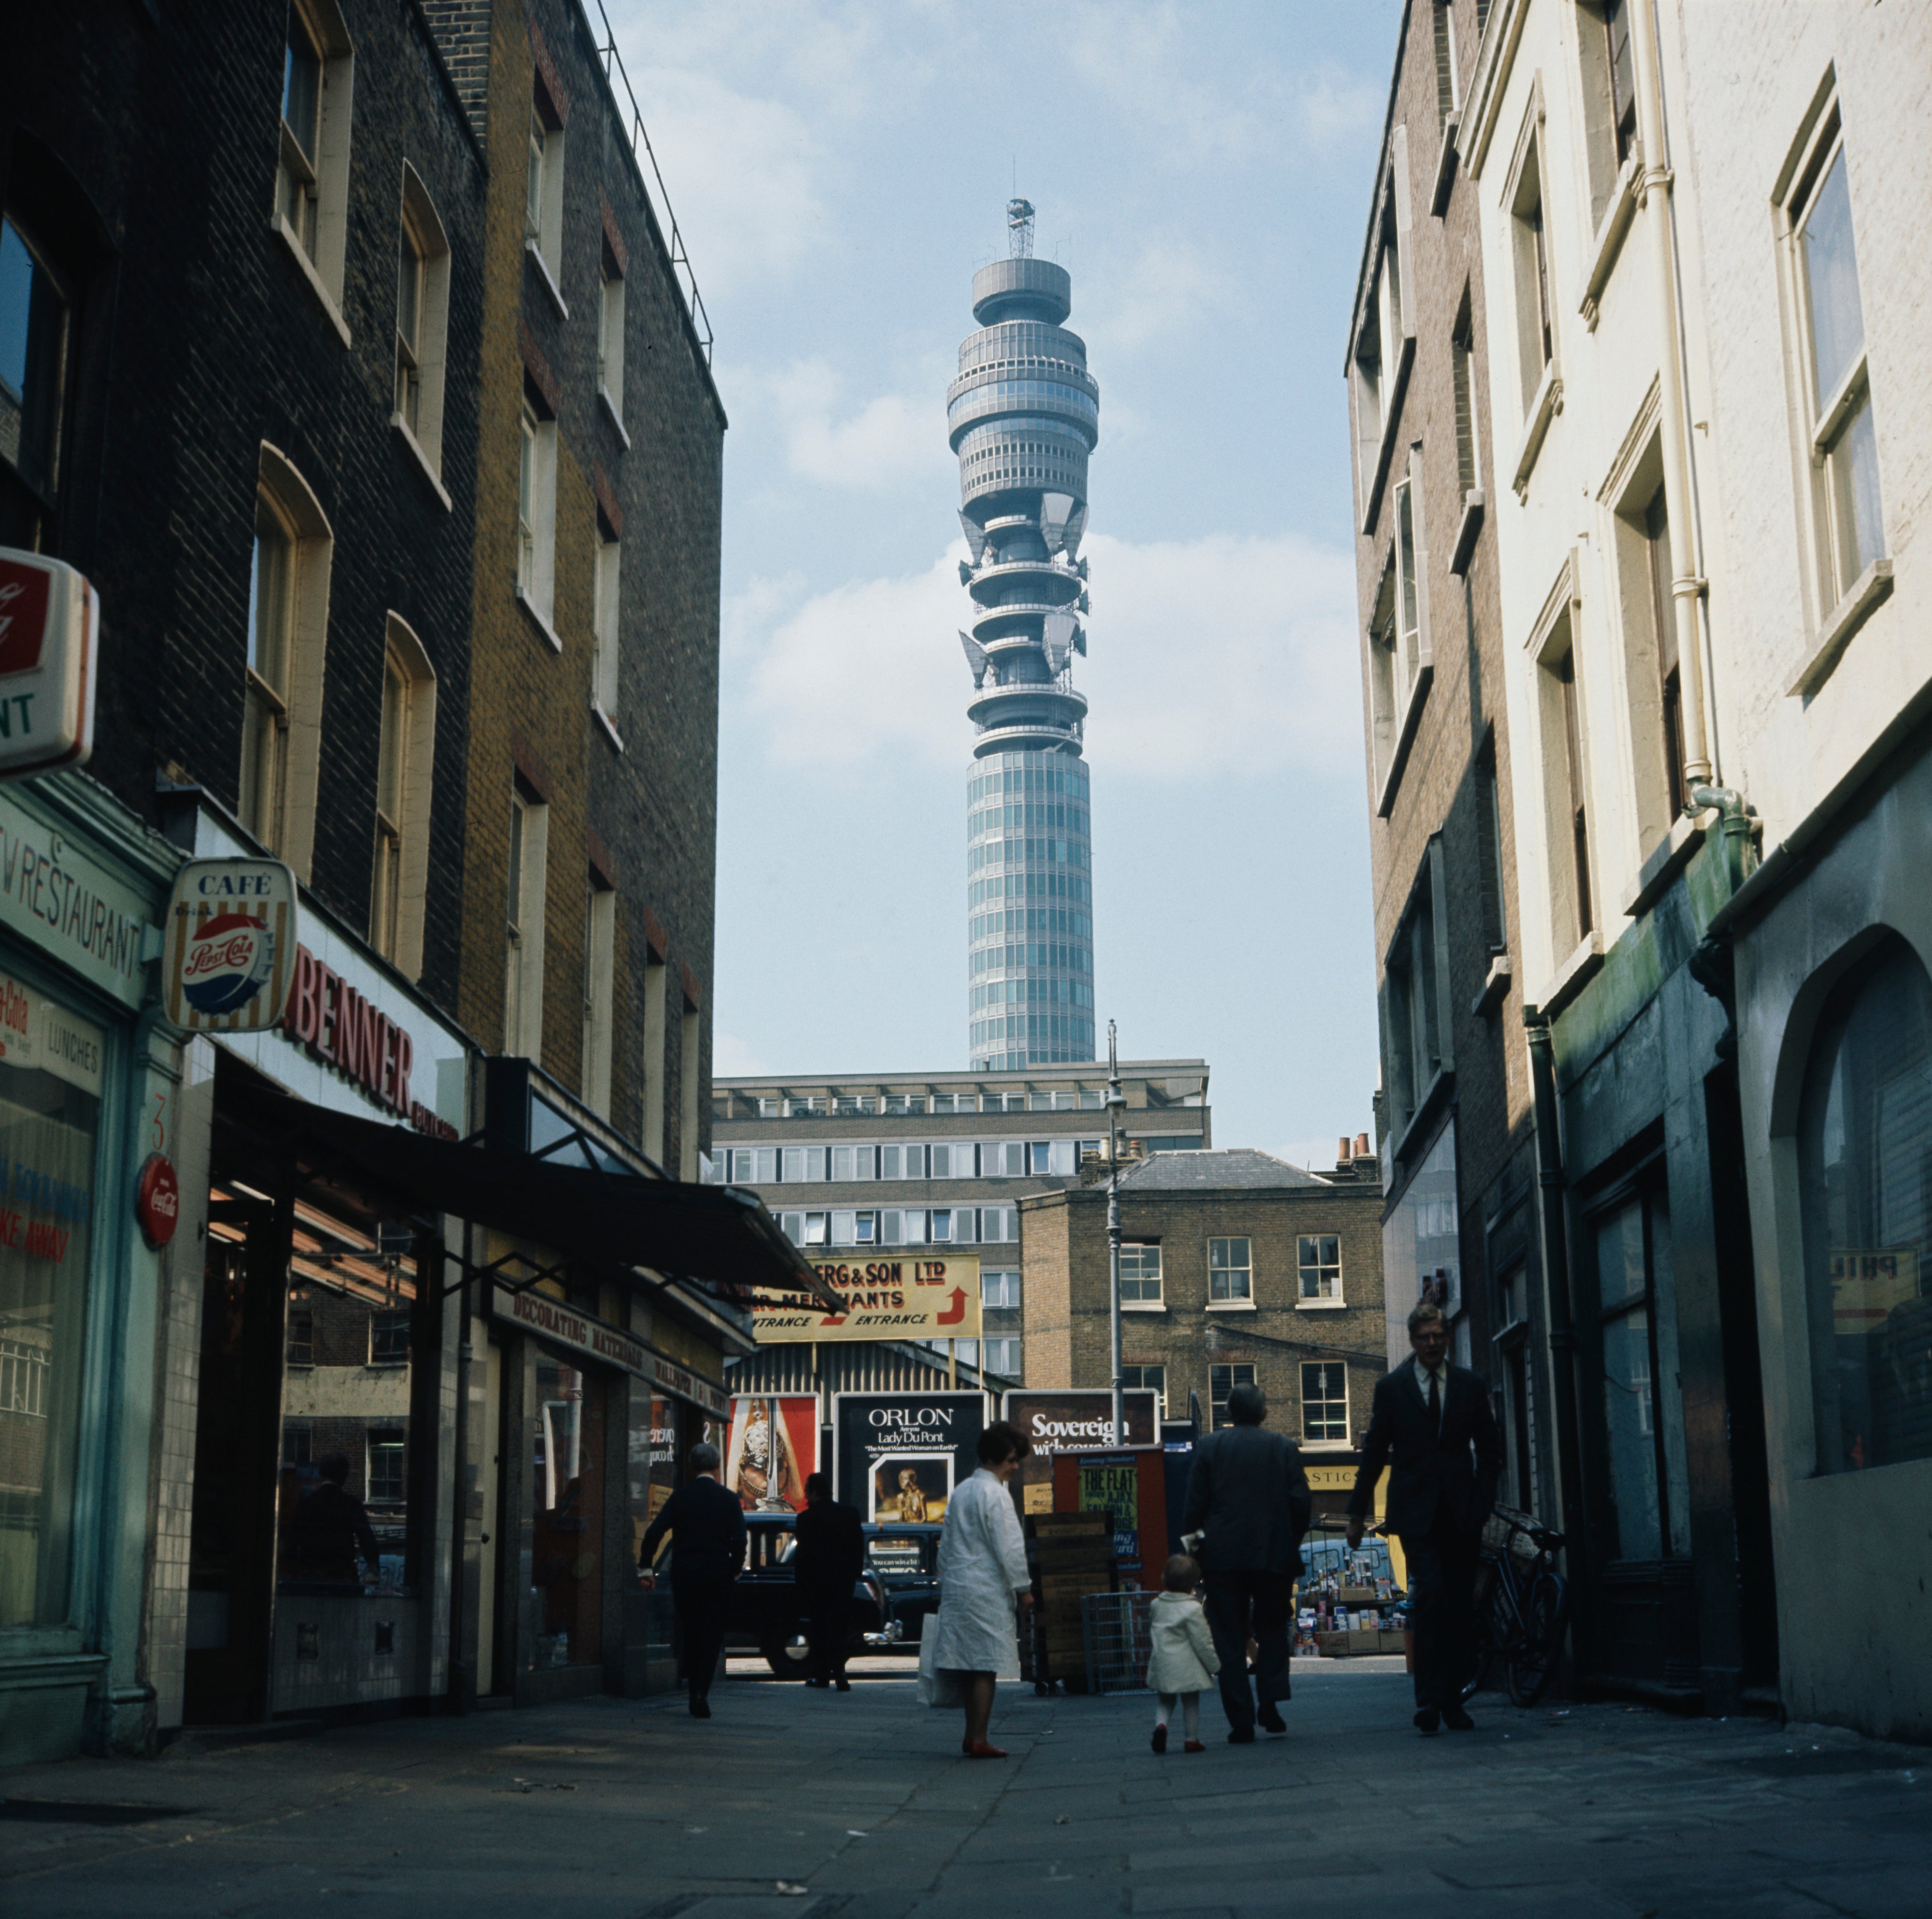 The BT Tower was London’s tallest structure for 16 years